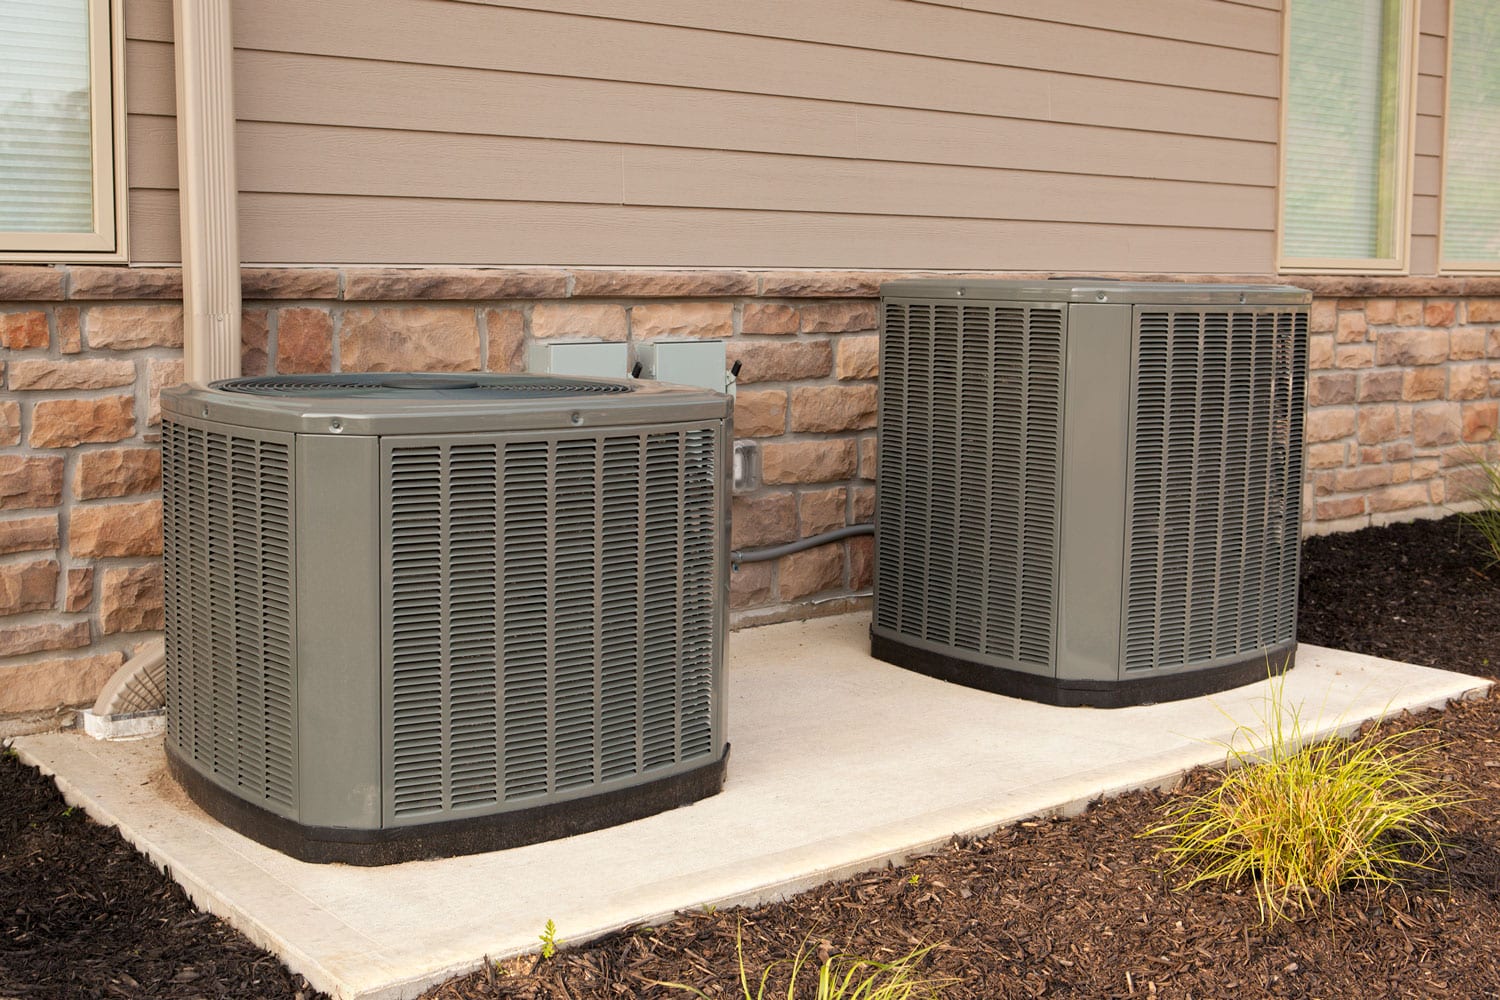 Two air conditioner units on a concrete slab